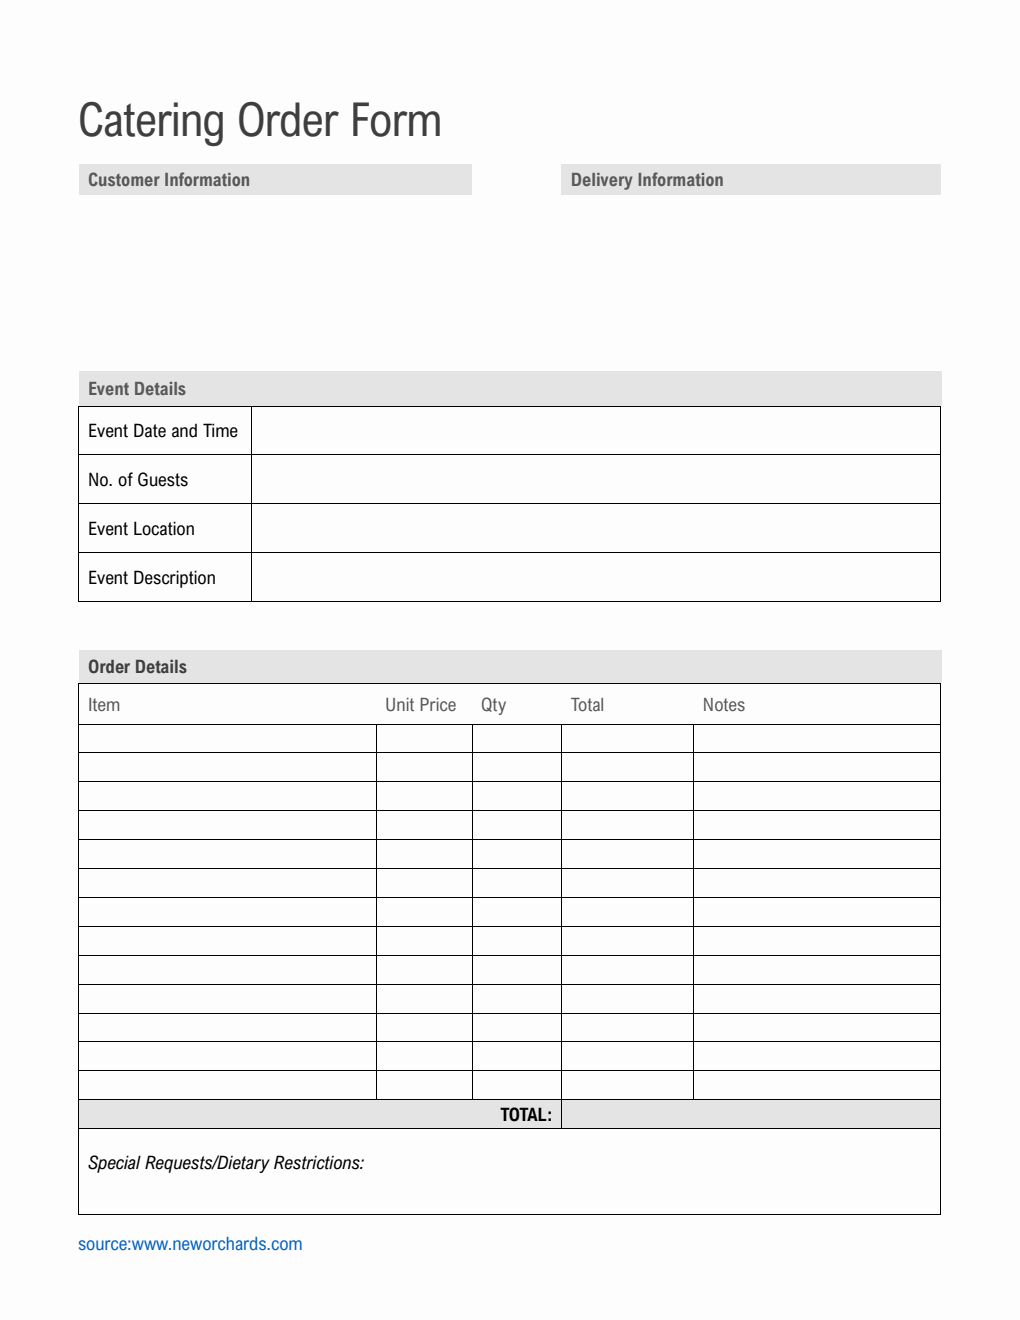 Simple Catering Order Form Template in PDF